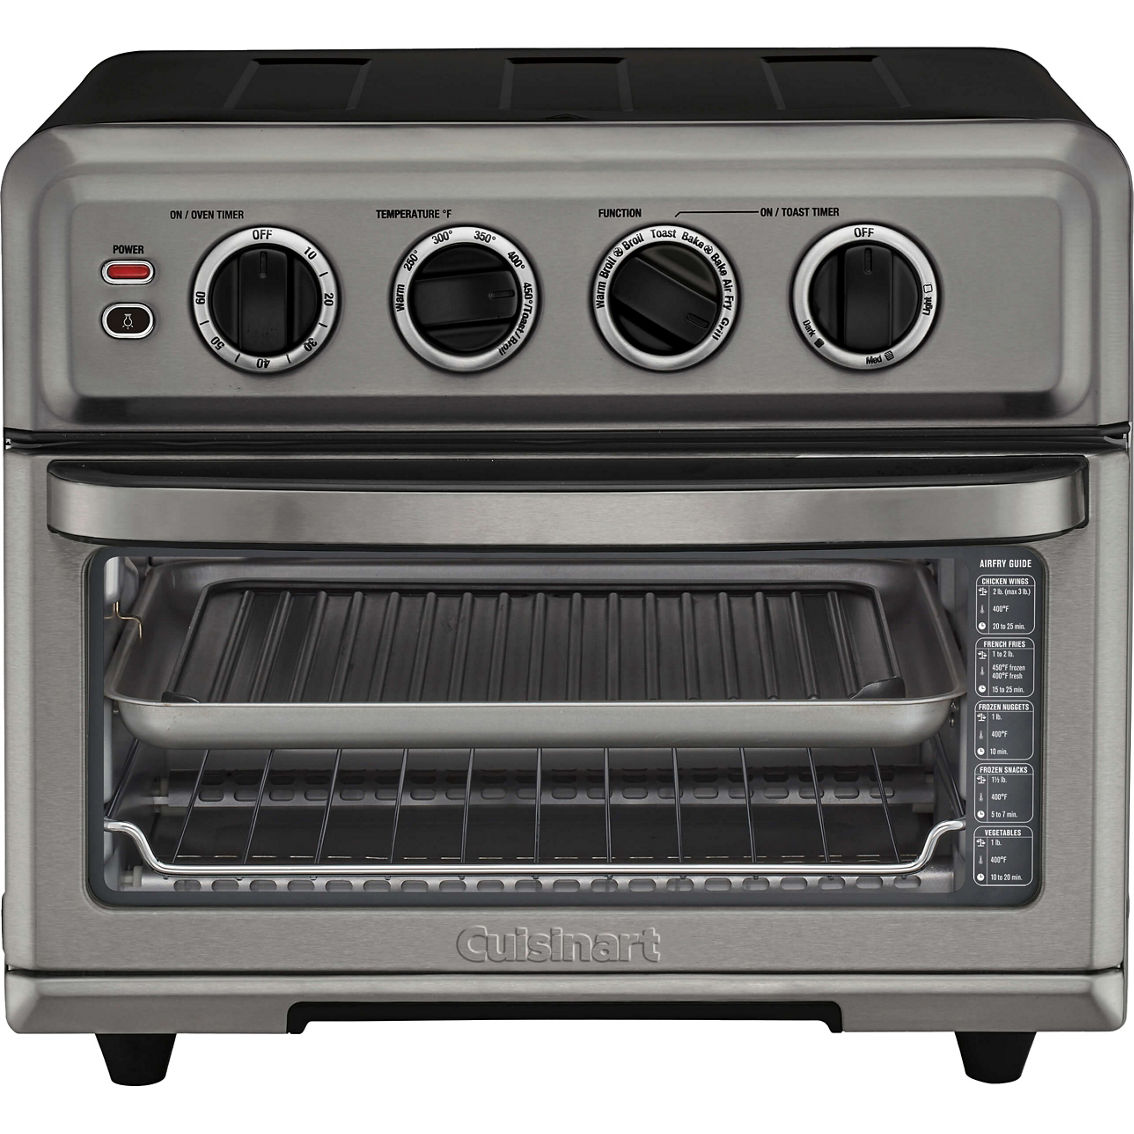 Cuisinart Air Fryer Toaster Oven with Grill - Image 2 of 3